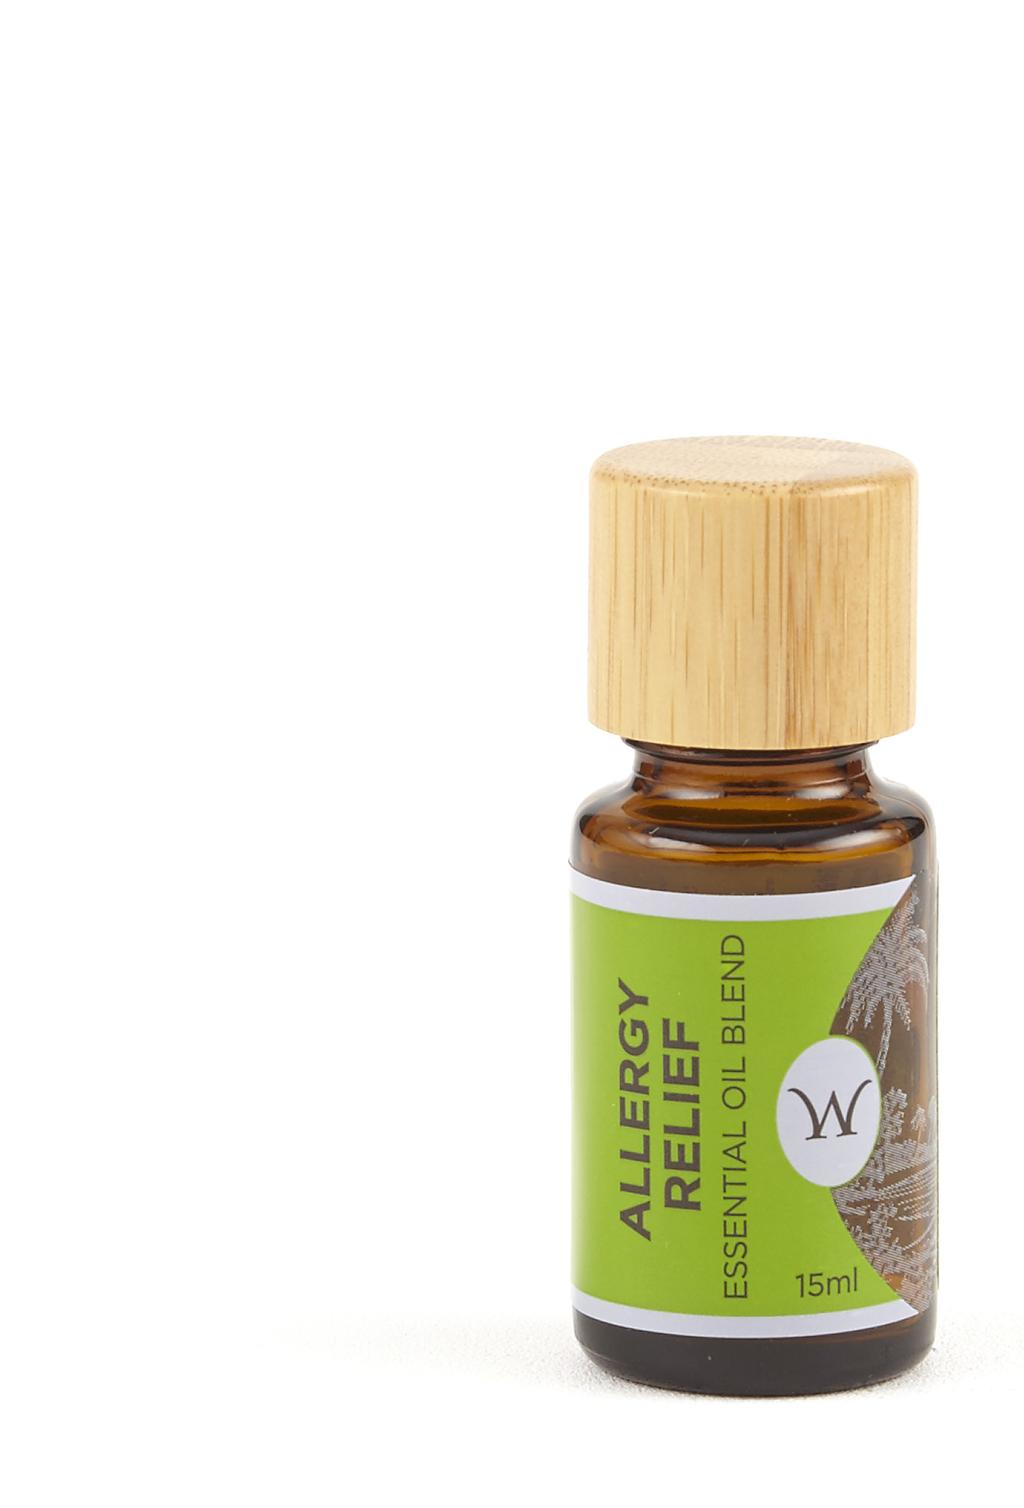 ESSENTIAL OIL BLEND Allergy Relief For thousands of years, essential oils have been used for medicine and health.